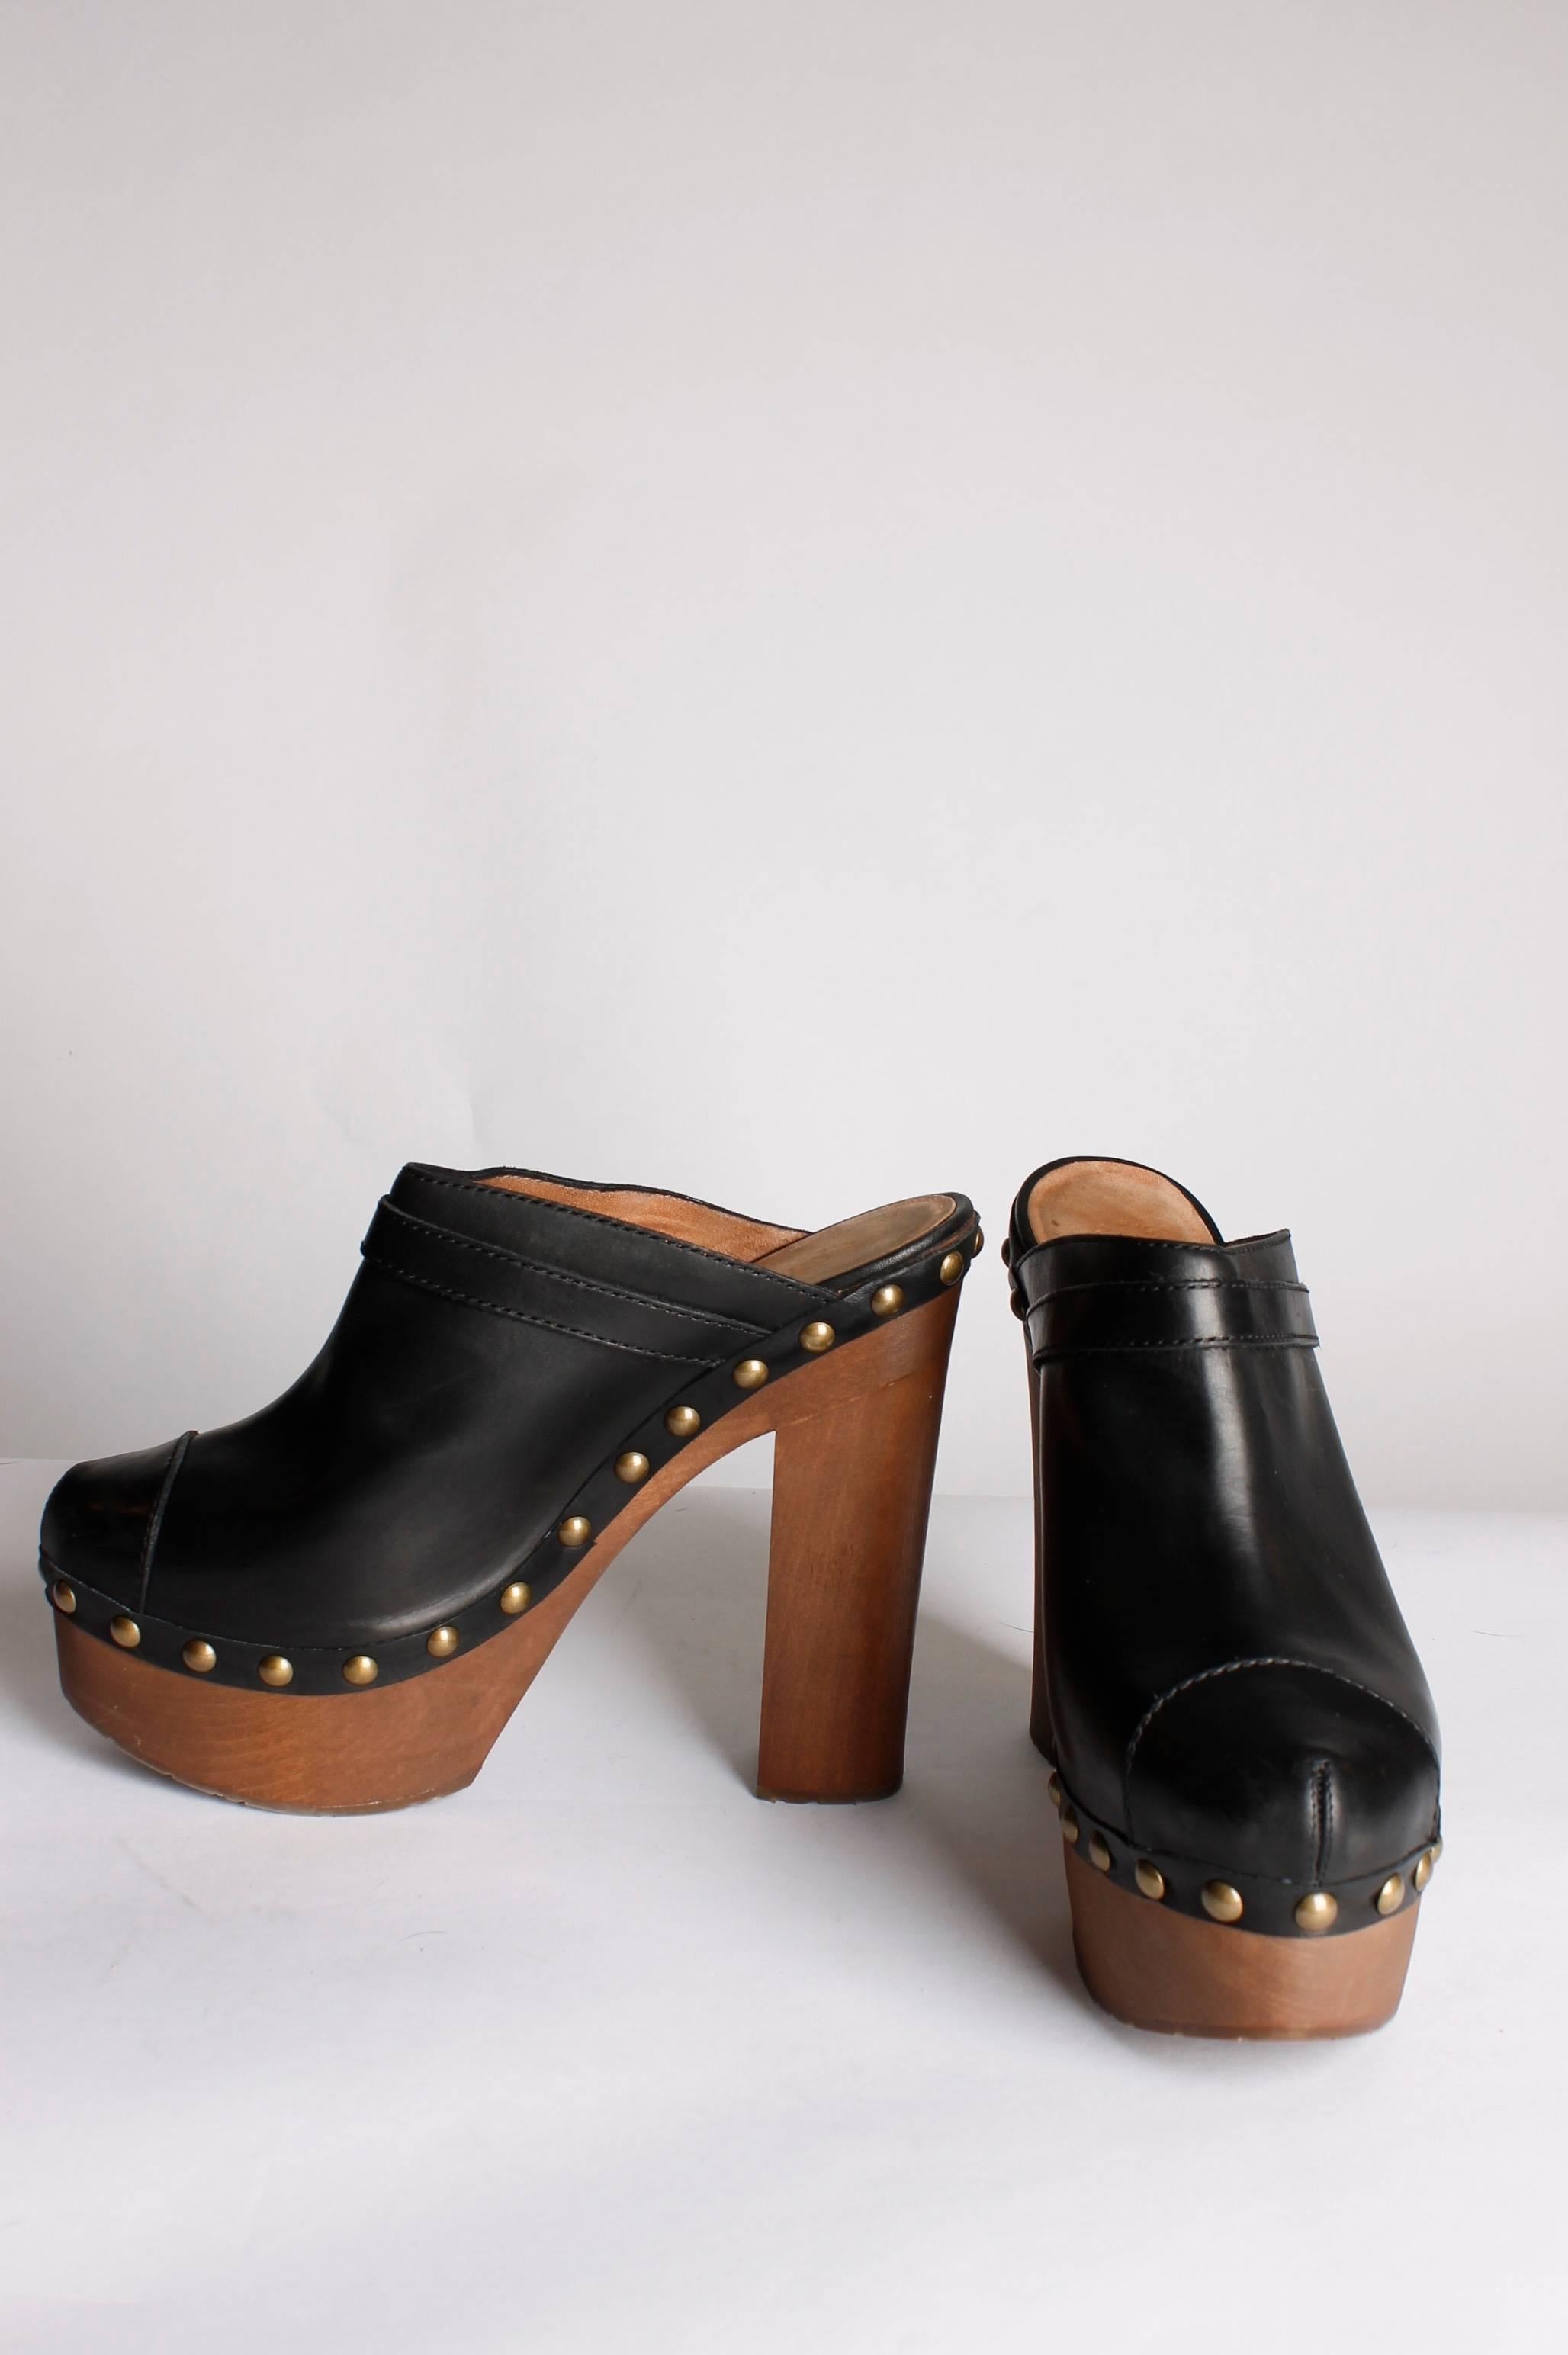 High heeled clogs by Chanel! This pair rocks!

Made of black leather, copper studs and a skyhigh heel of 16 centimeters. The platform measures 6 centimeters. Only been worn once, in perfect condition. 

A double toe piece and a little belt on